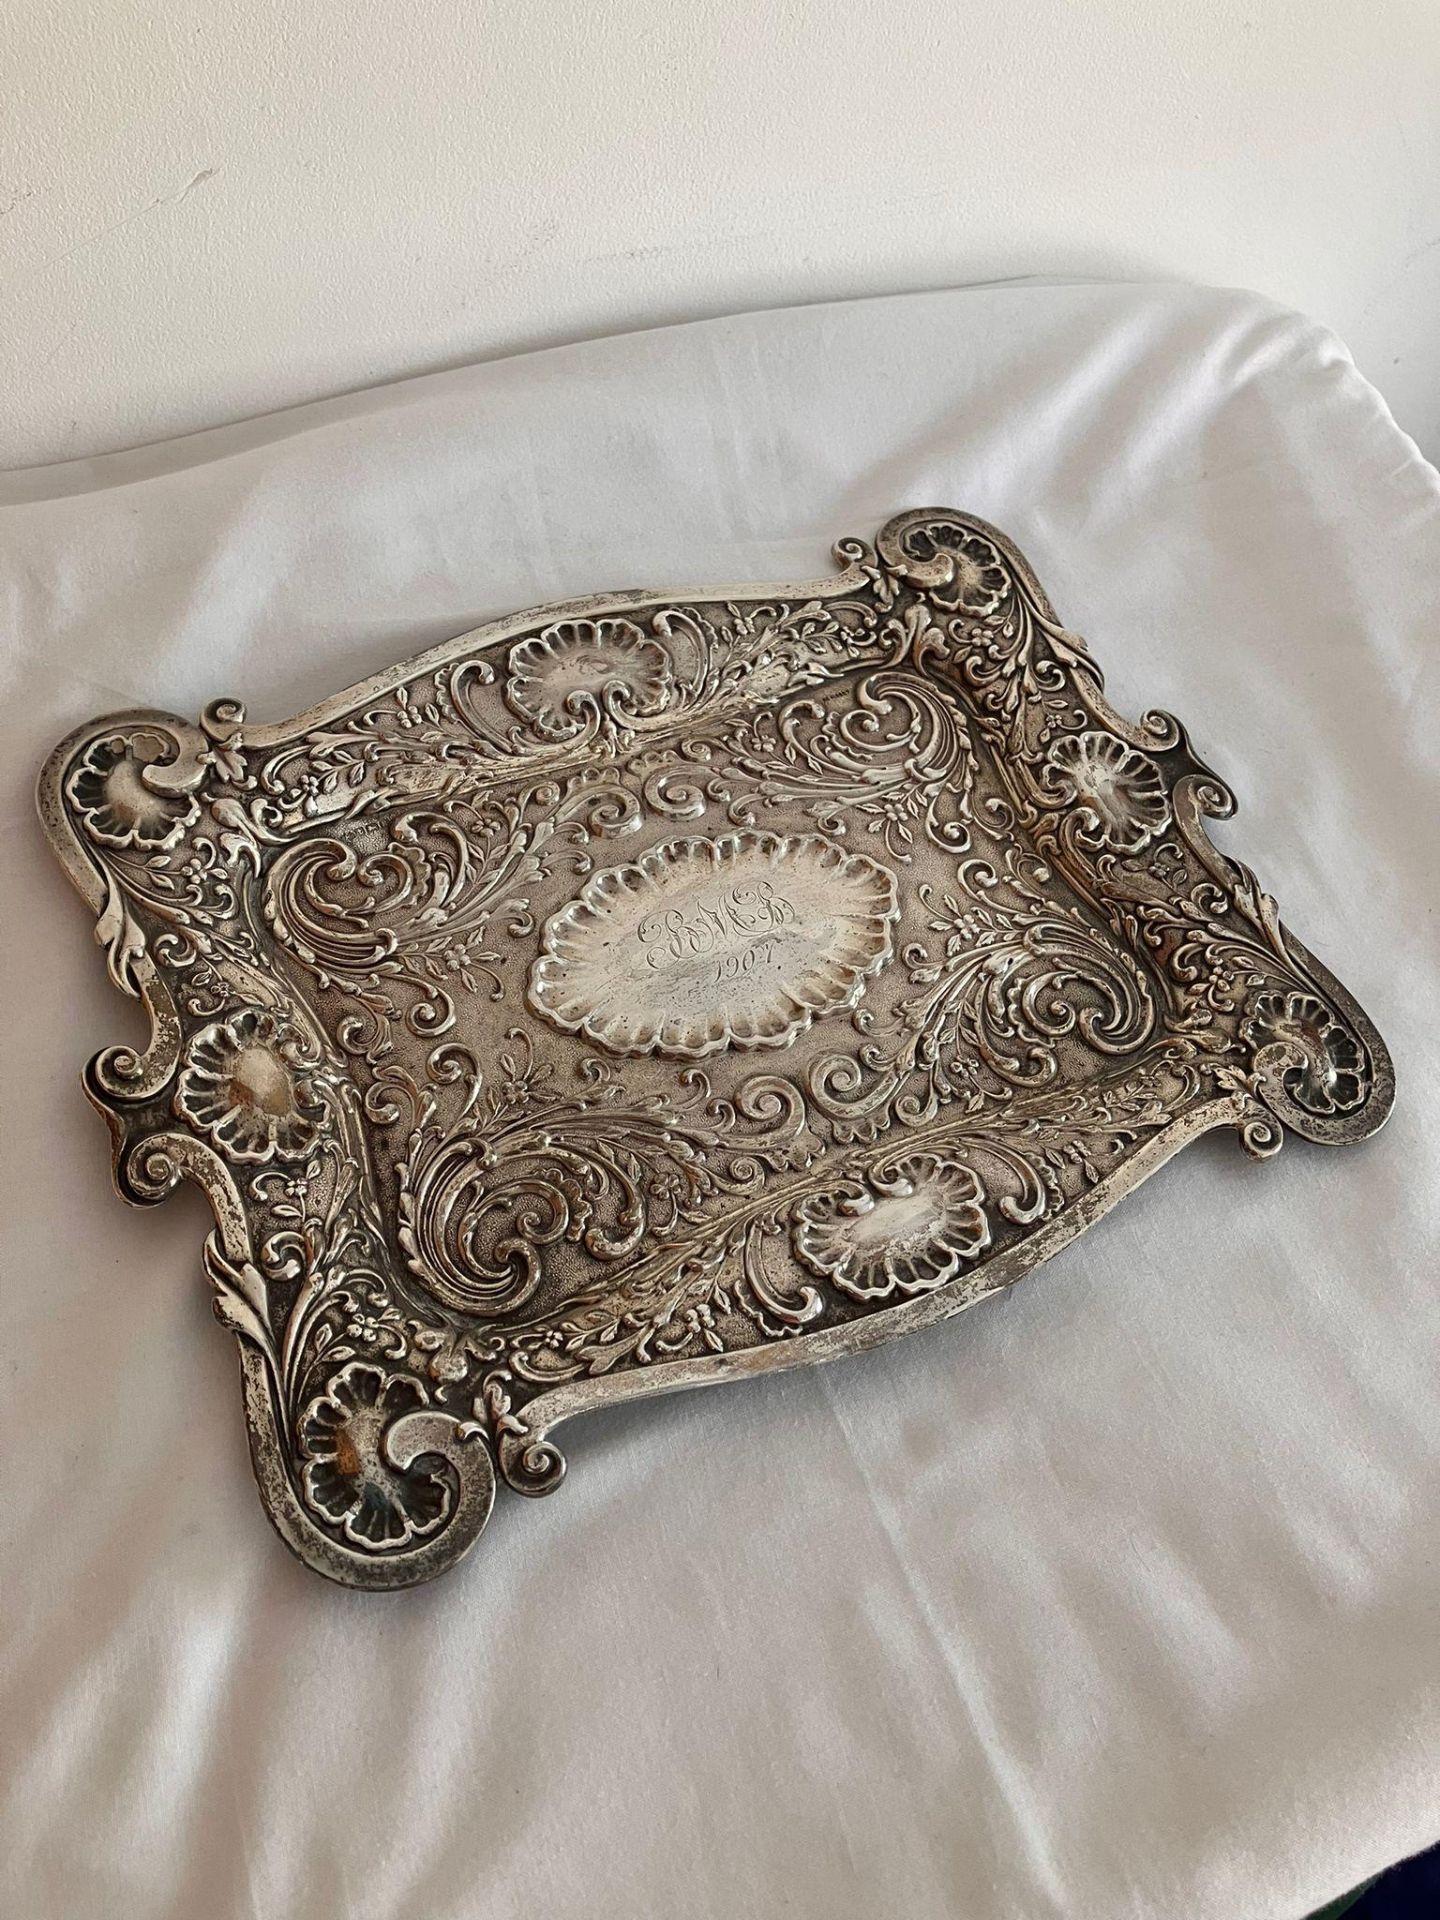 Magnificent Antique SILVER TRAY. Edwardian Large Trinket Tray with beautiful raised Scroll and Shell - Image 2 of 2